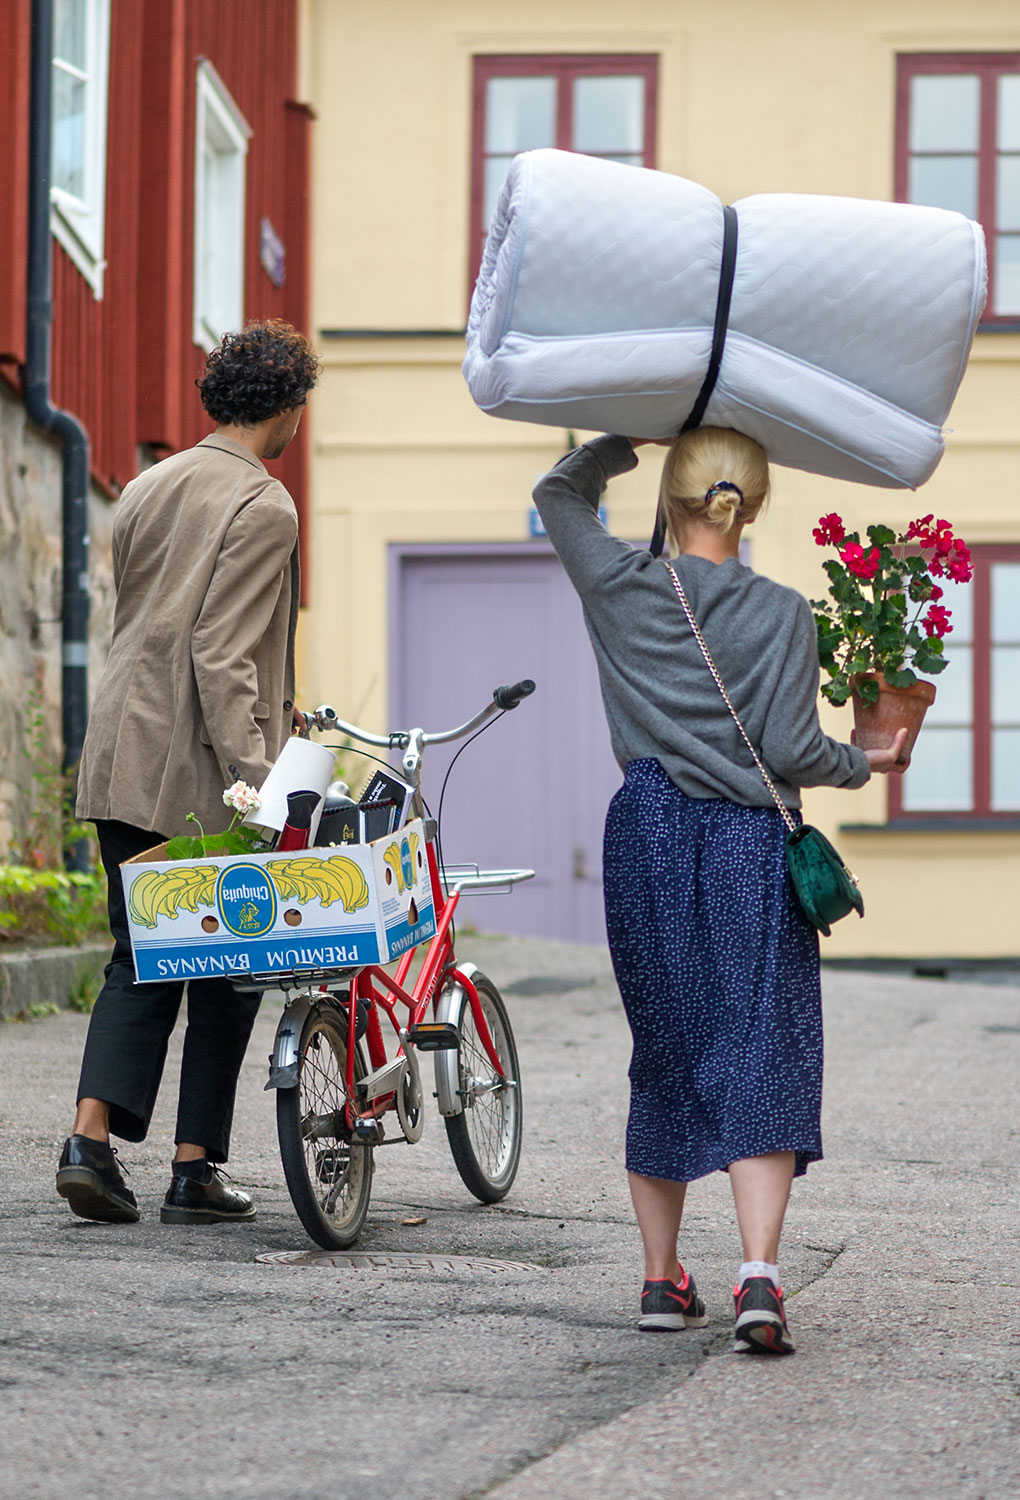 Students walking in Uppsala with boxes, a matress and a bike. 